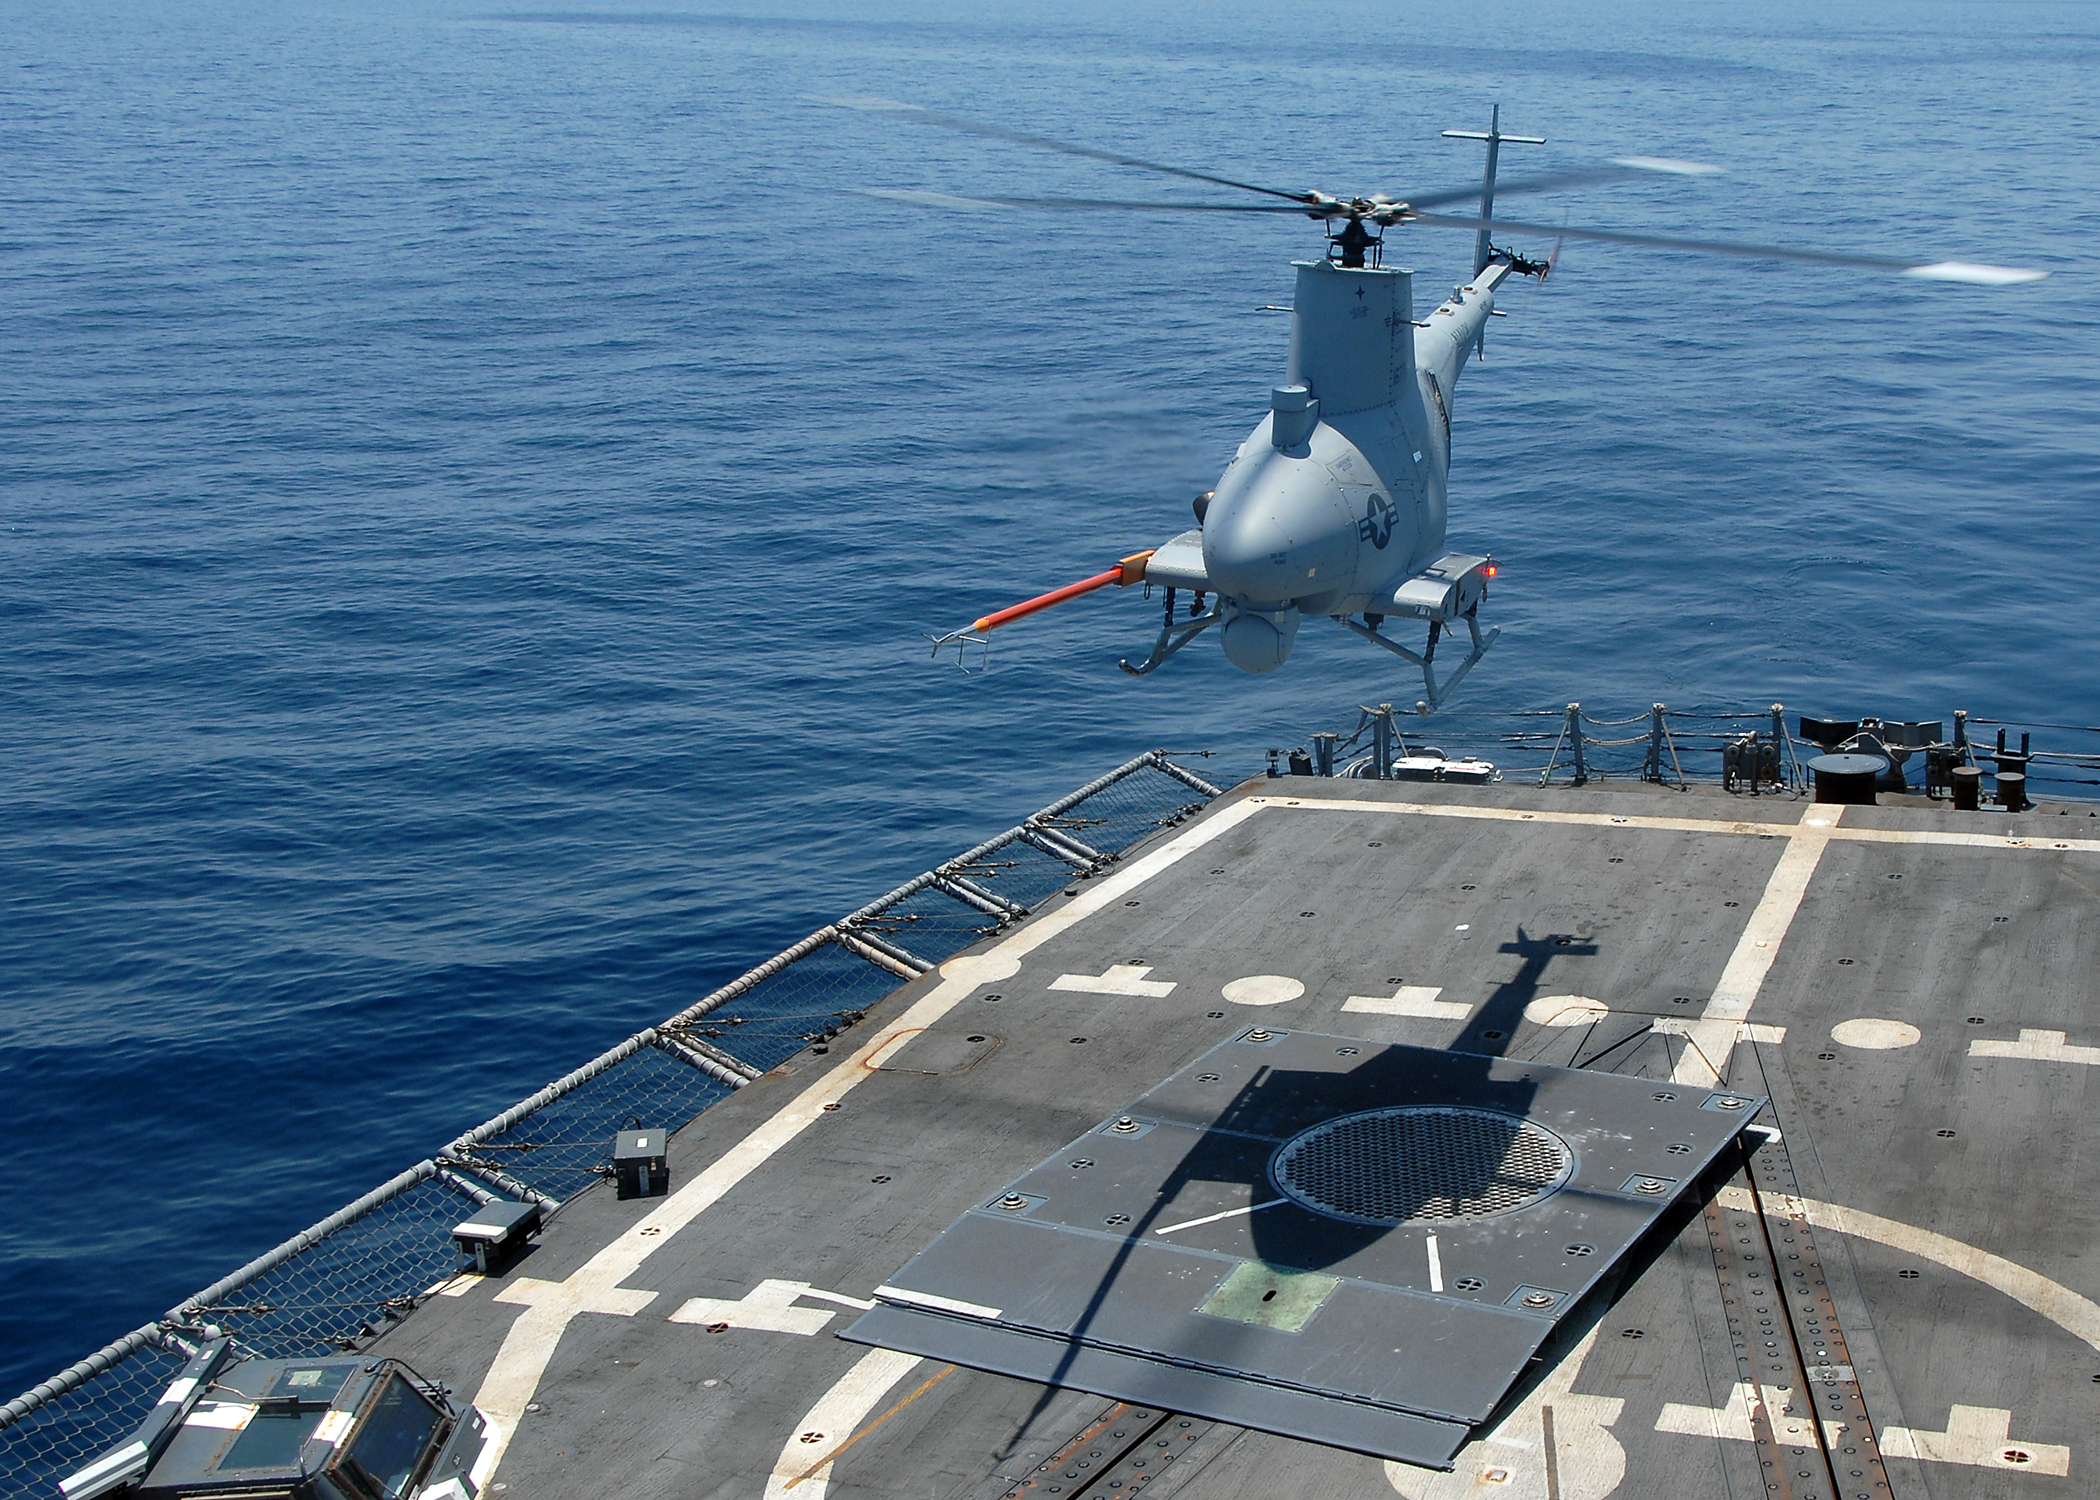 Video: Navy Helicopter Drone Makes First Coke Bust on the High Seas